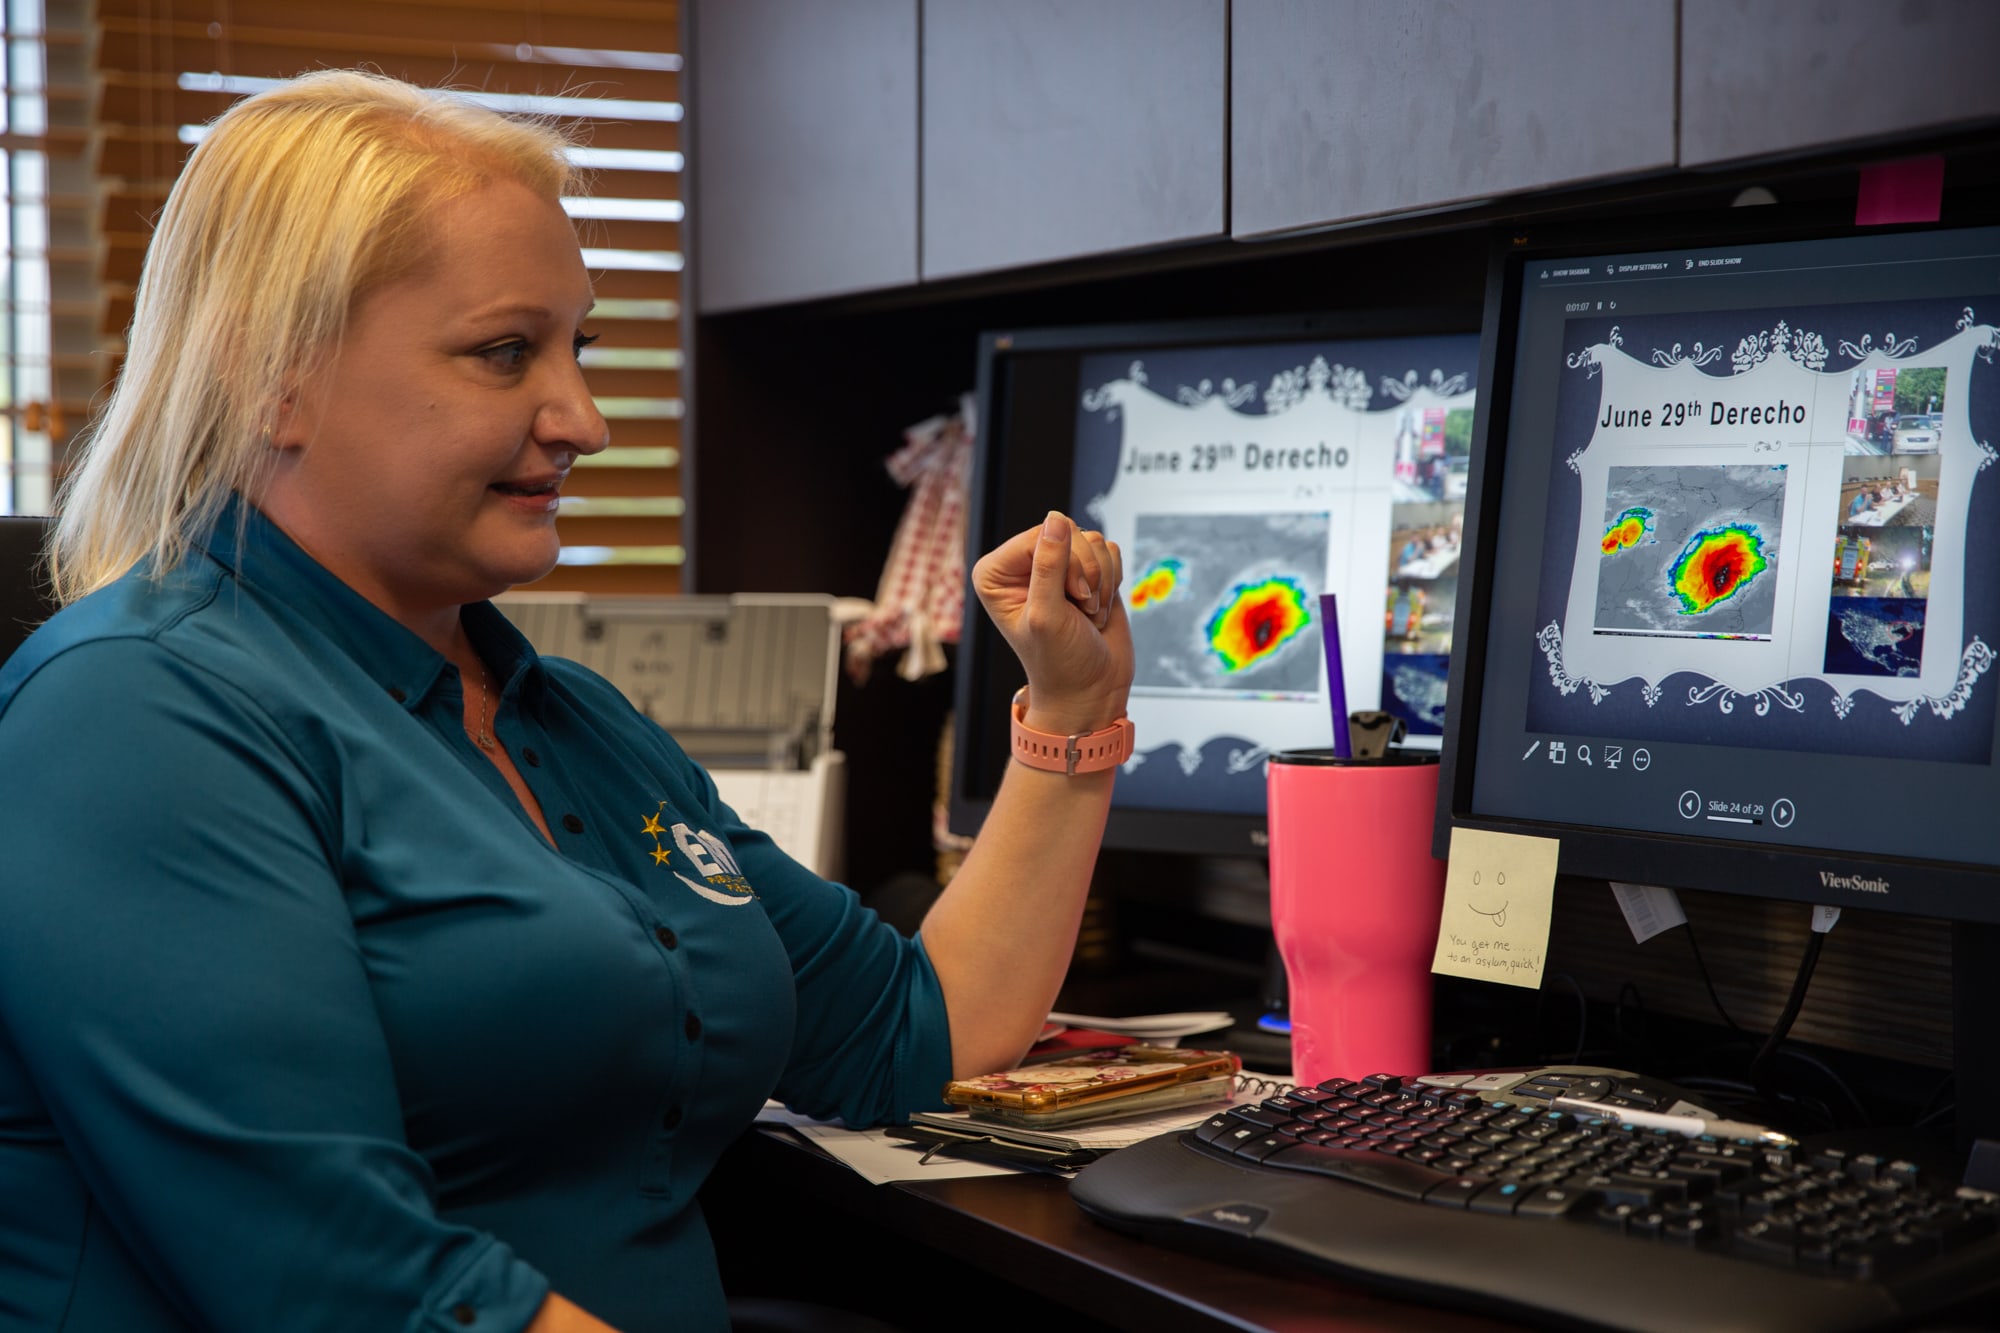 Laura Pysz, director of Harrison County Emergency Management in West Virginia, called the 2012 derecho “a storm they say that could never have happened.” (Briana Castañón/News21)